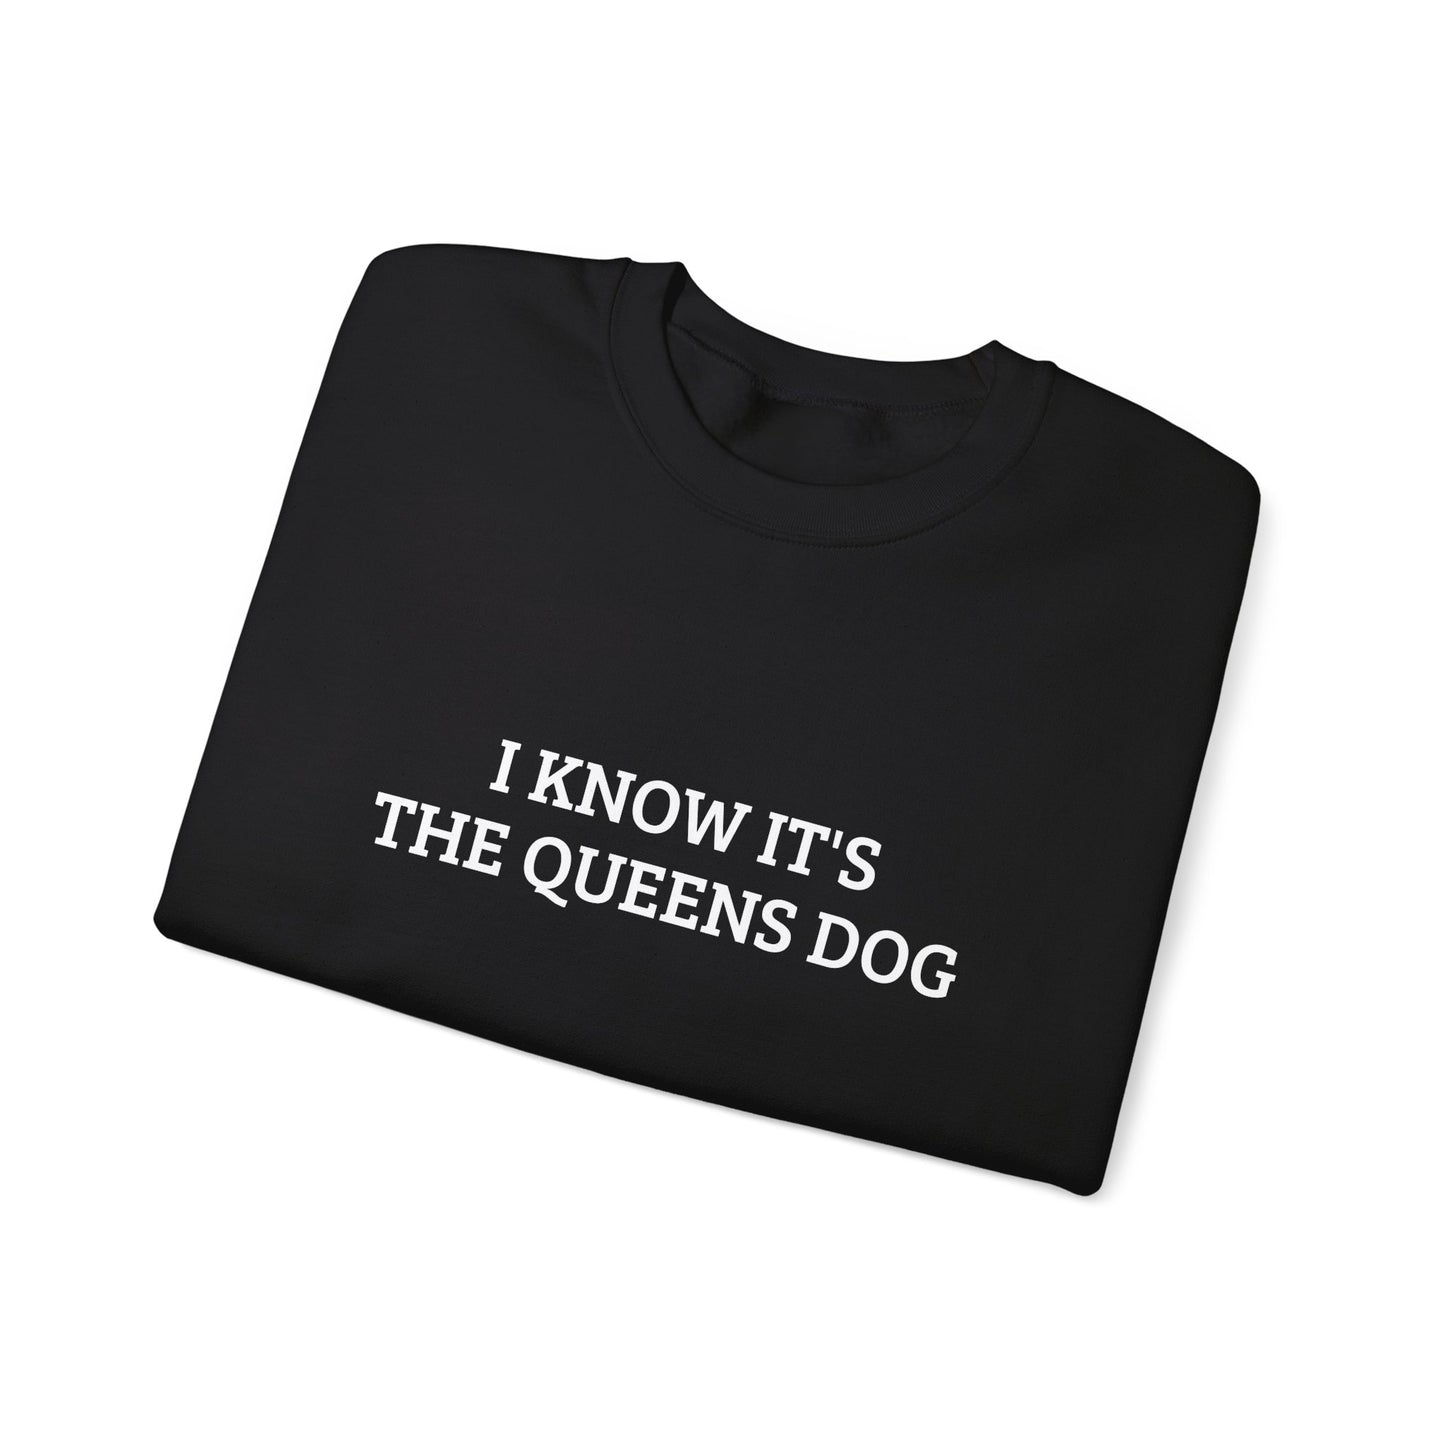 I KNOW IT’S THE QUEENS DOG